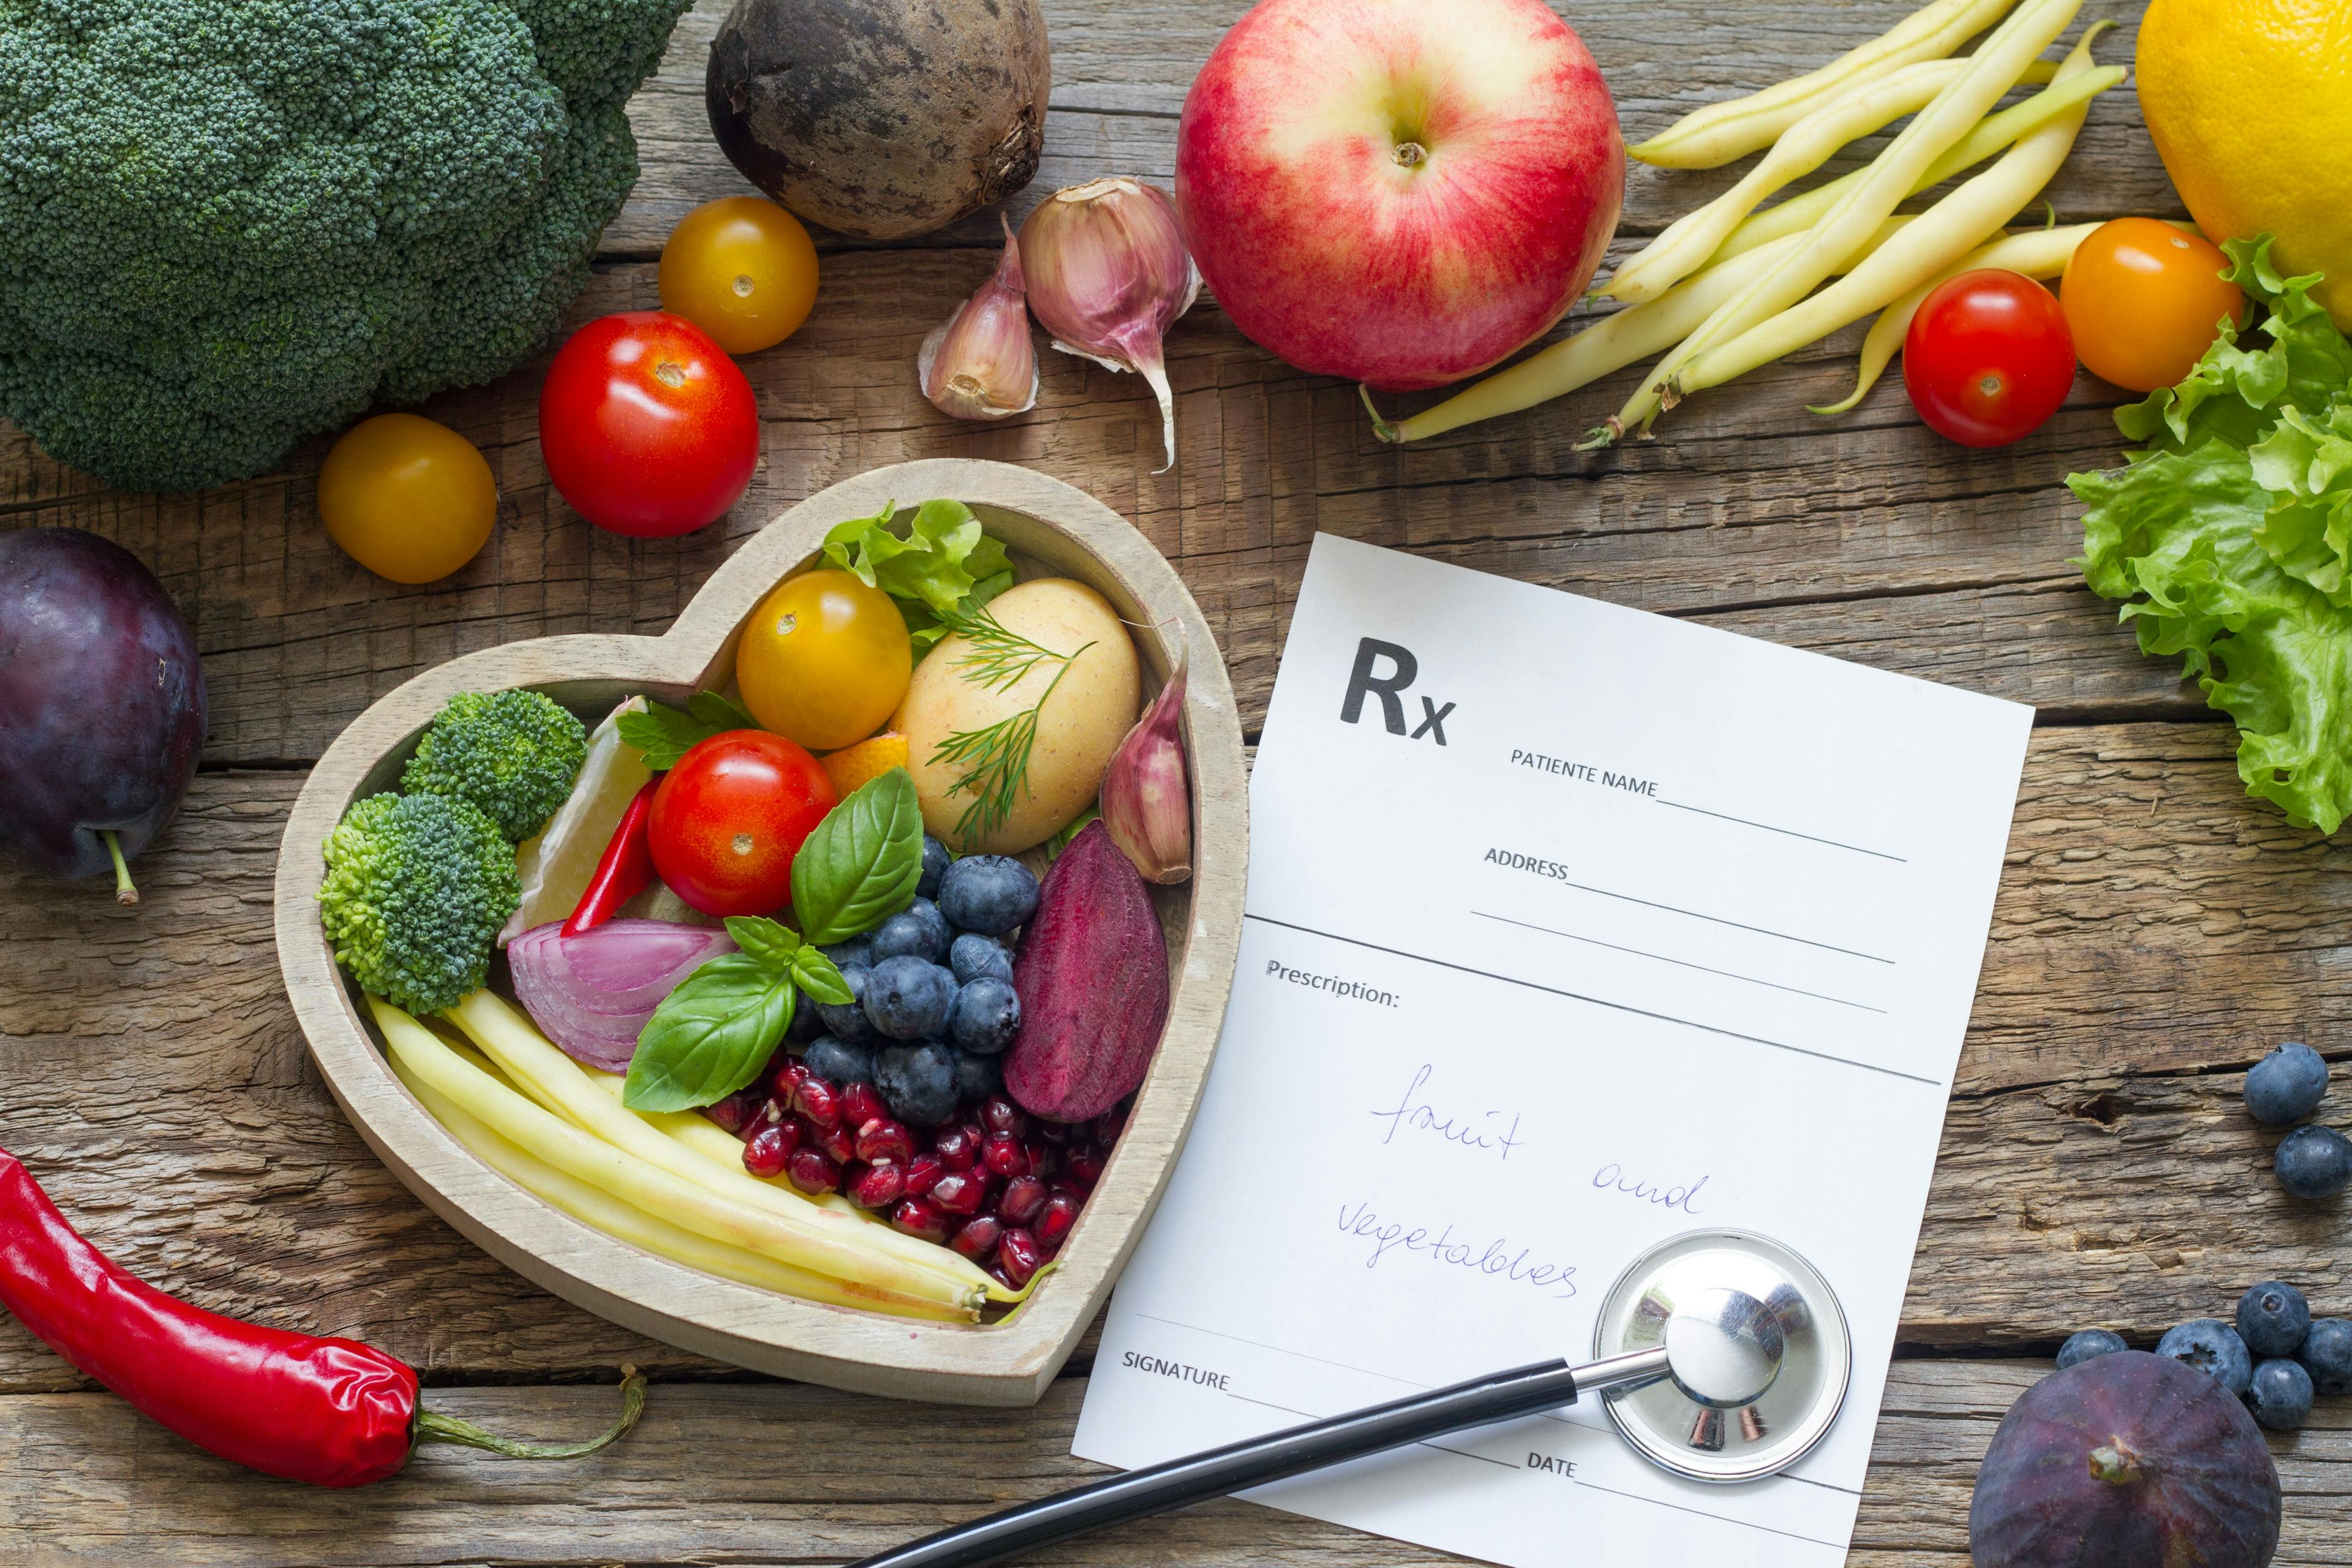 Healthy food in heart stethoscope and medical prescription diet and medicine concept - Image credit: udra11 | stock.adobe.com